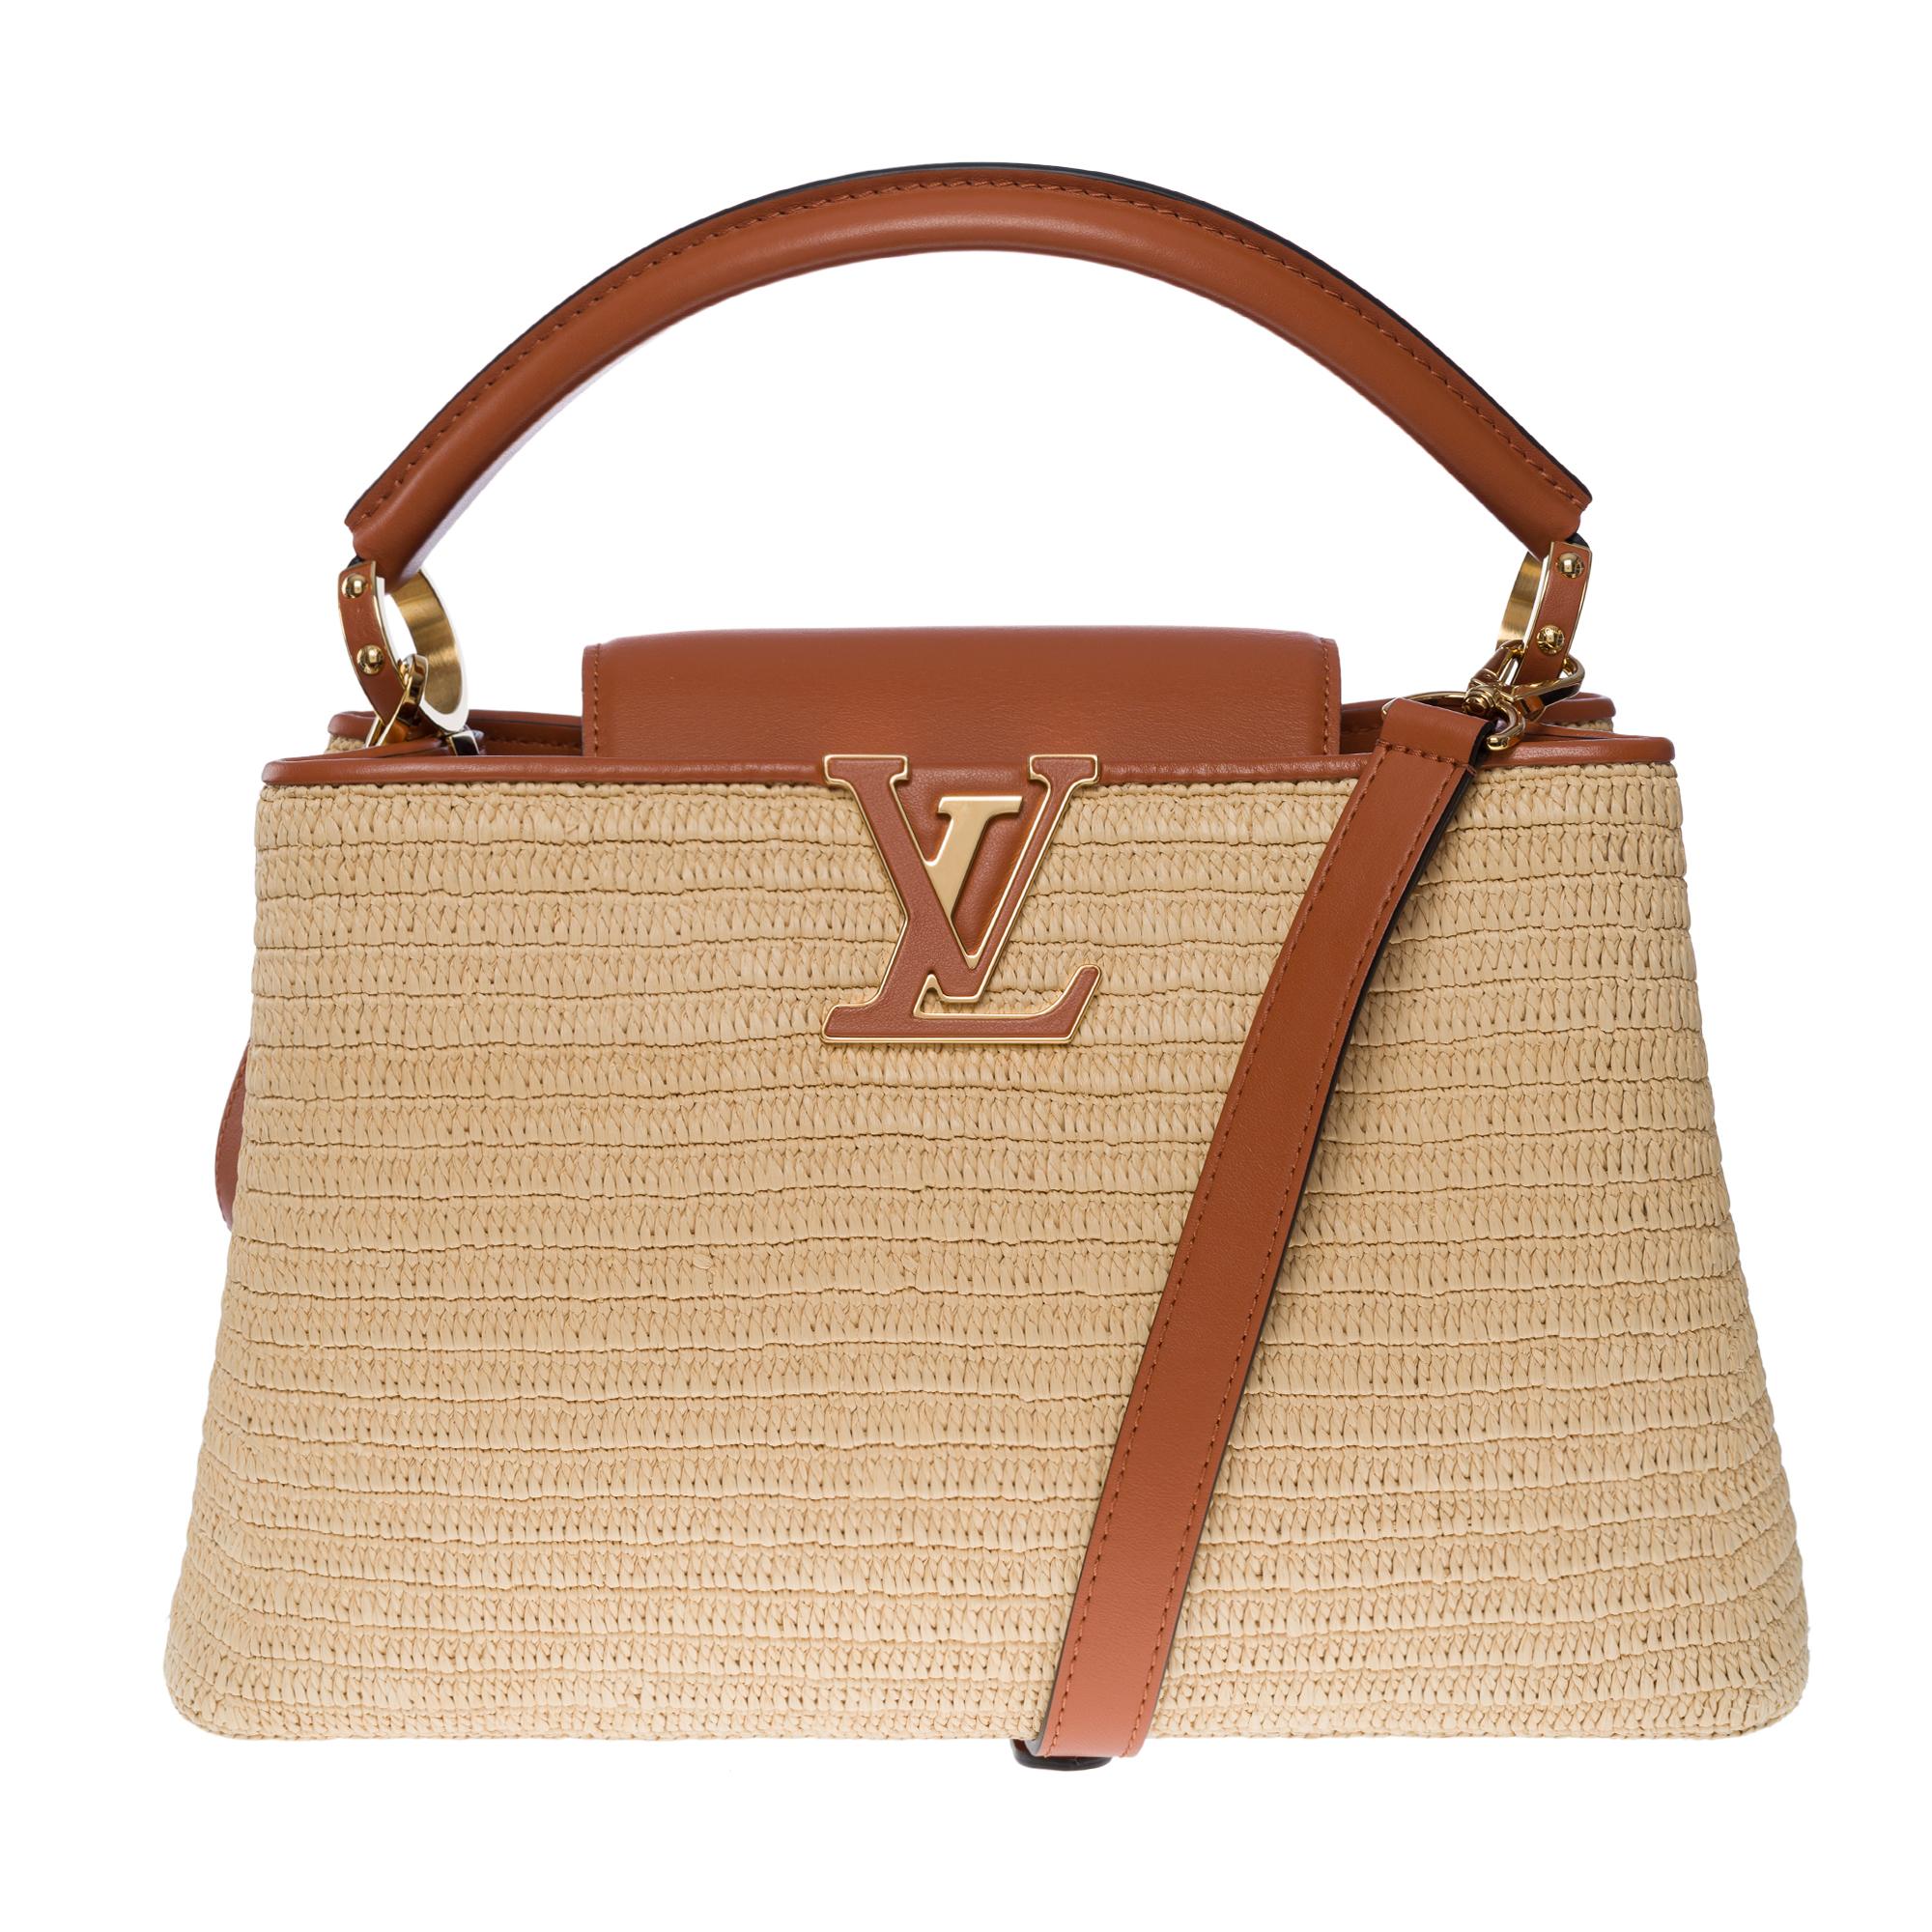 Ultra Exclusive- limited edition Capucines Raffia

The Capucines MM bag is made from braided raffia to create a stylish yet summery silhouette. Smooth cowhide leather on the handle and strap perfectly complement the raffia, giving this classic bag a